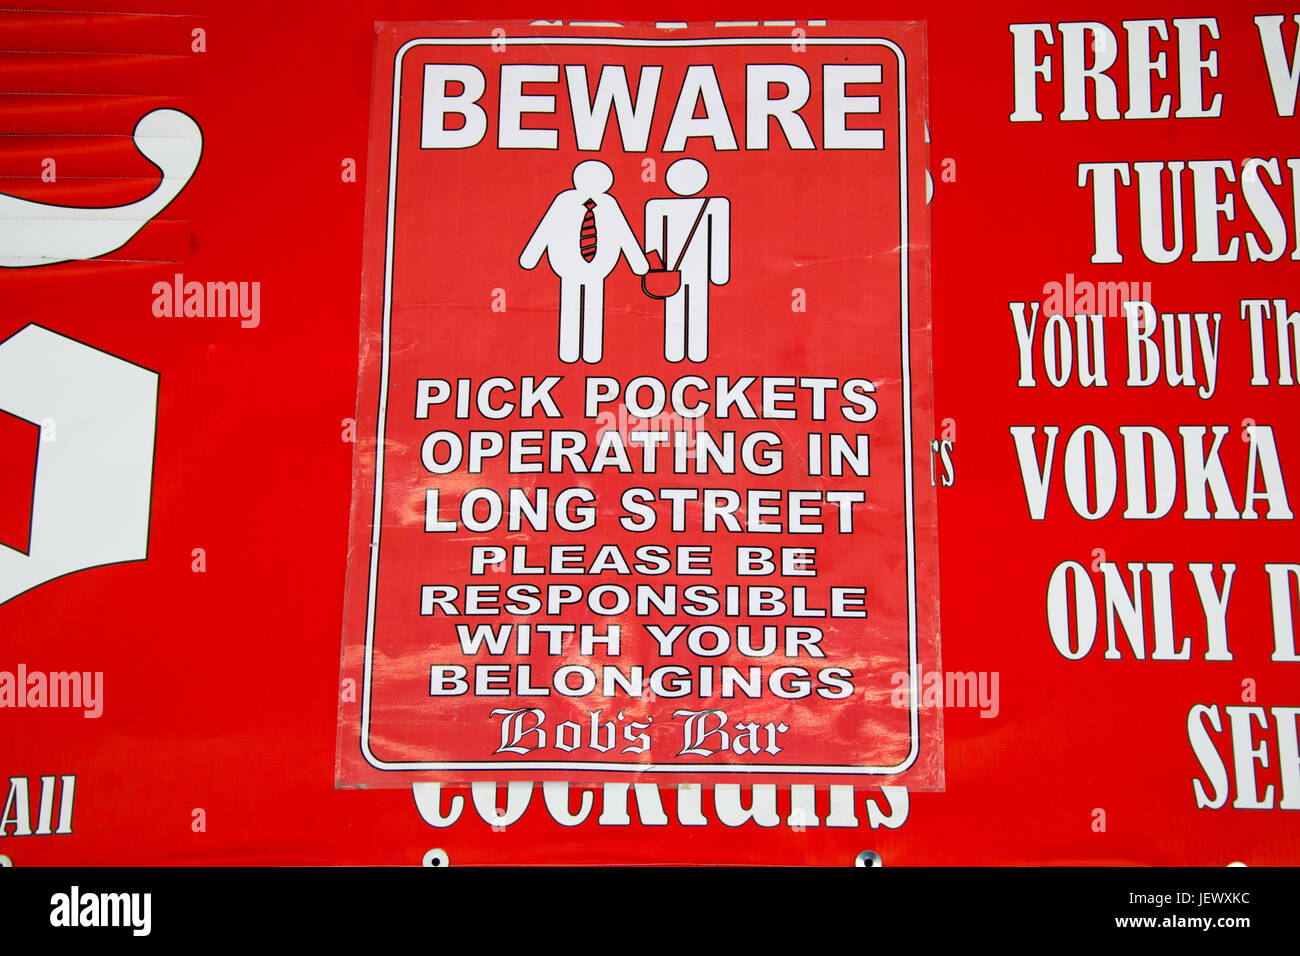 Theft warnings in Cape Town, South Africa Stock Photo